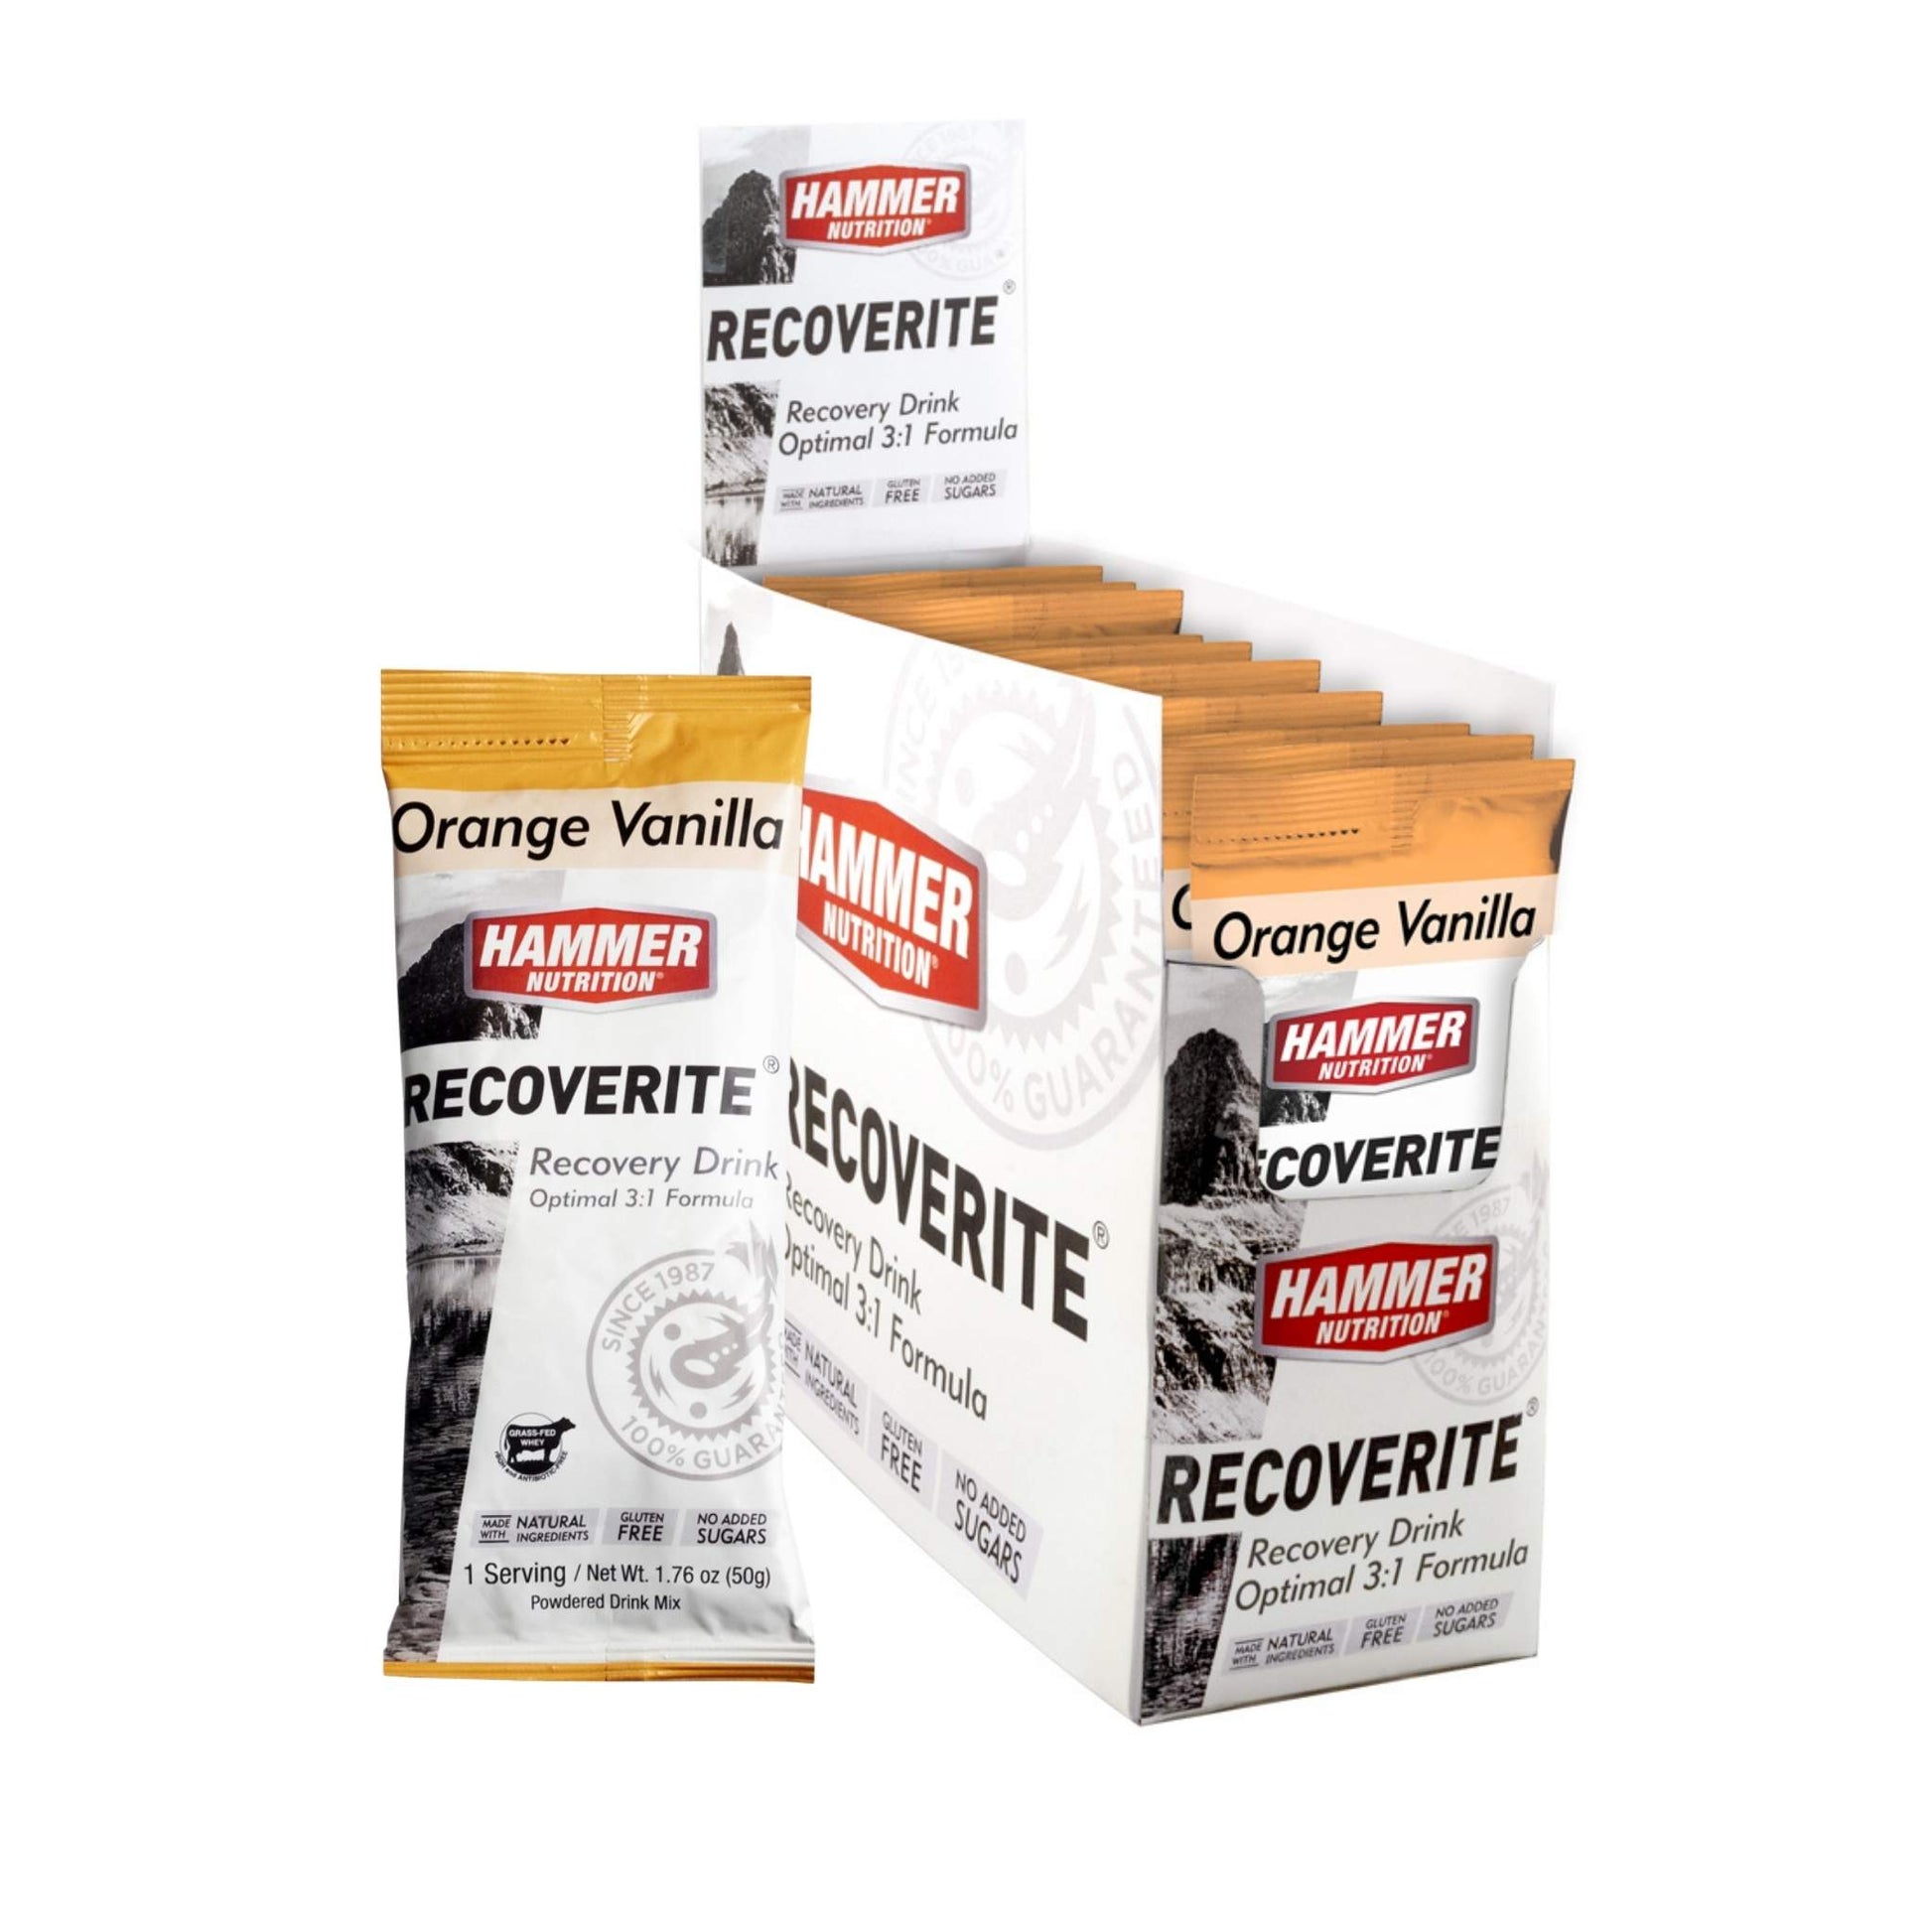 Hammer Nutrition - Recoverite, Orange Vanilla, Box of 12 Servings, Shown with Packaging, Team Perfect